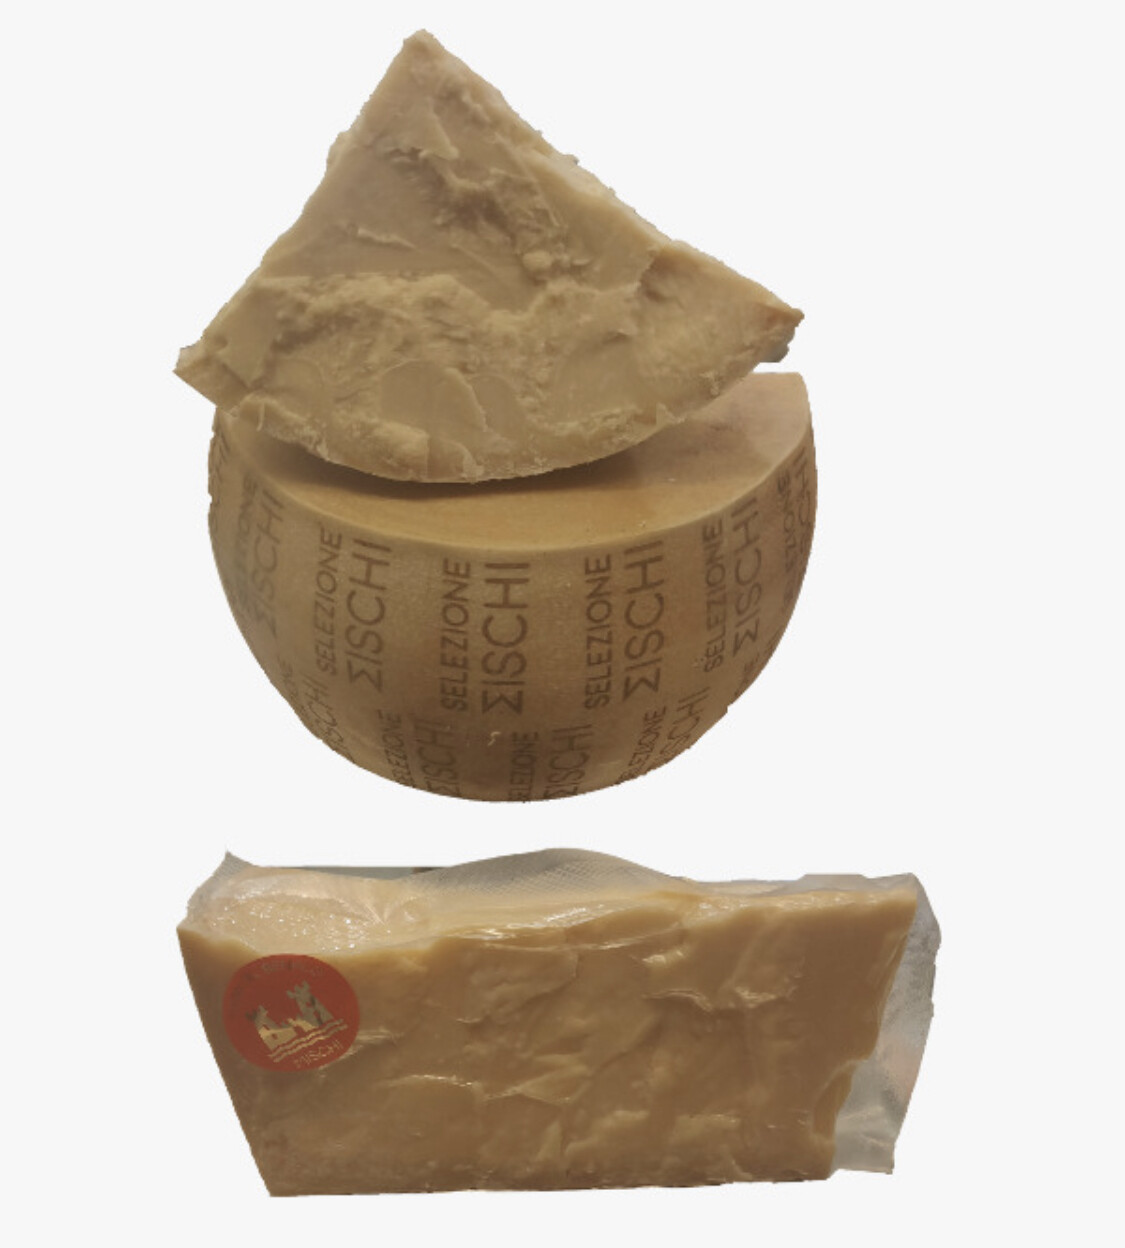 Seasoned cheese "Mischi family selection" suitable to eat but also to grate 23 months seasoning, 1.1 kilo